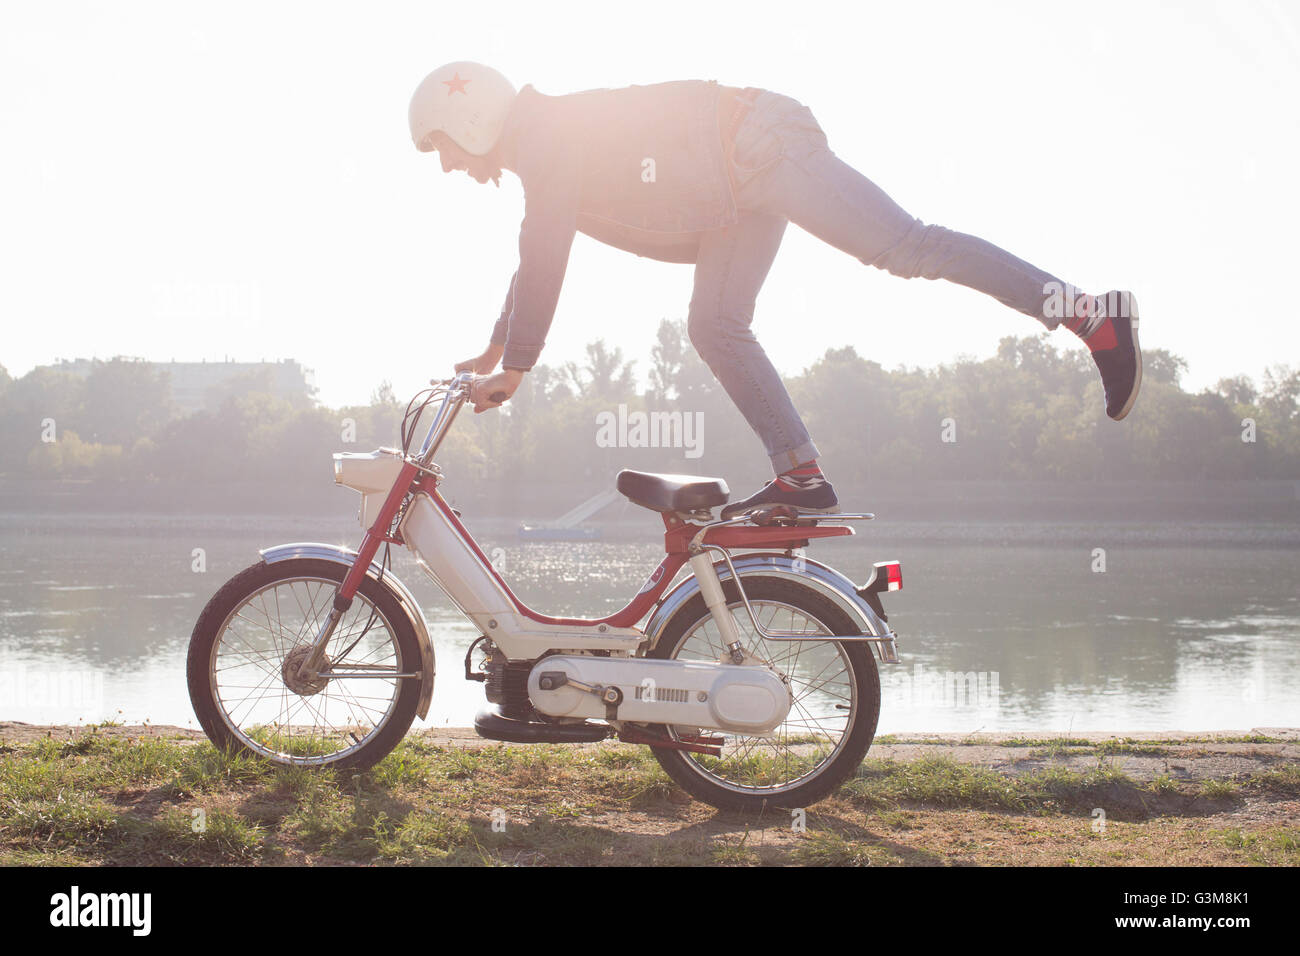 Mid adult riding moped, doing stunt, beside lake Stock Photo